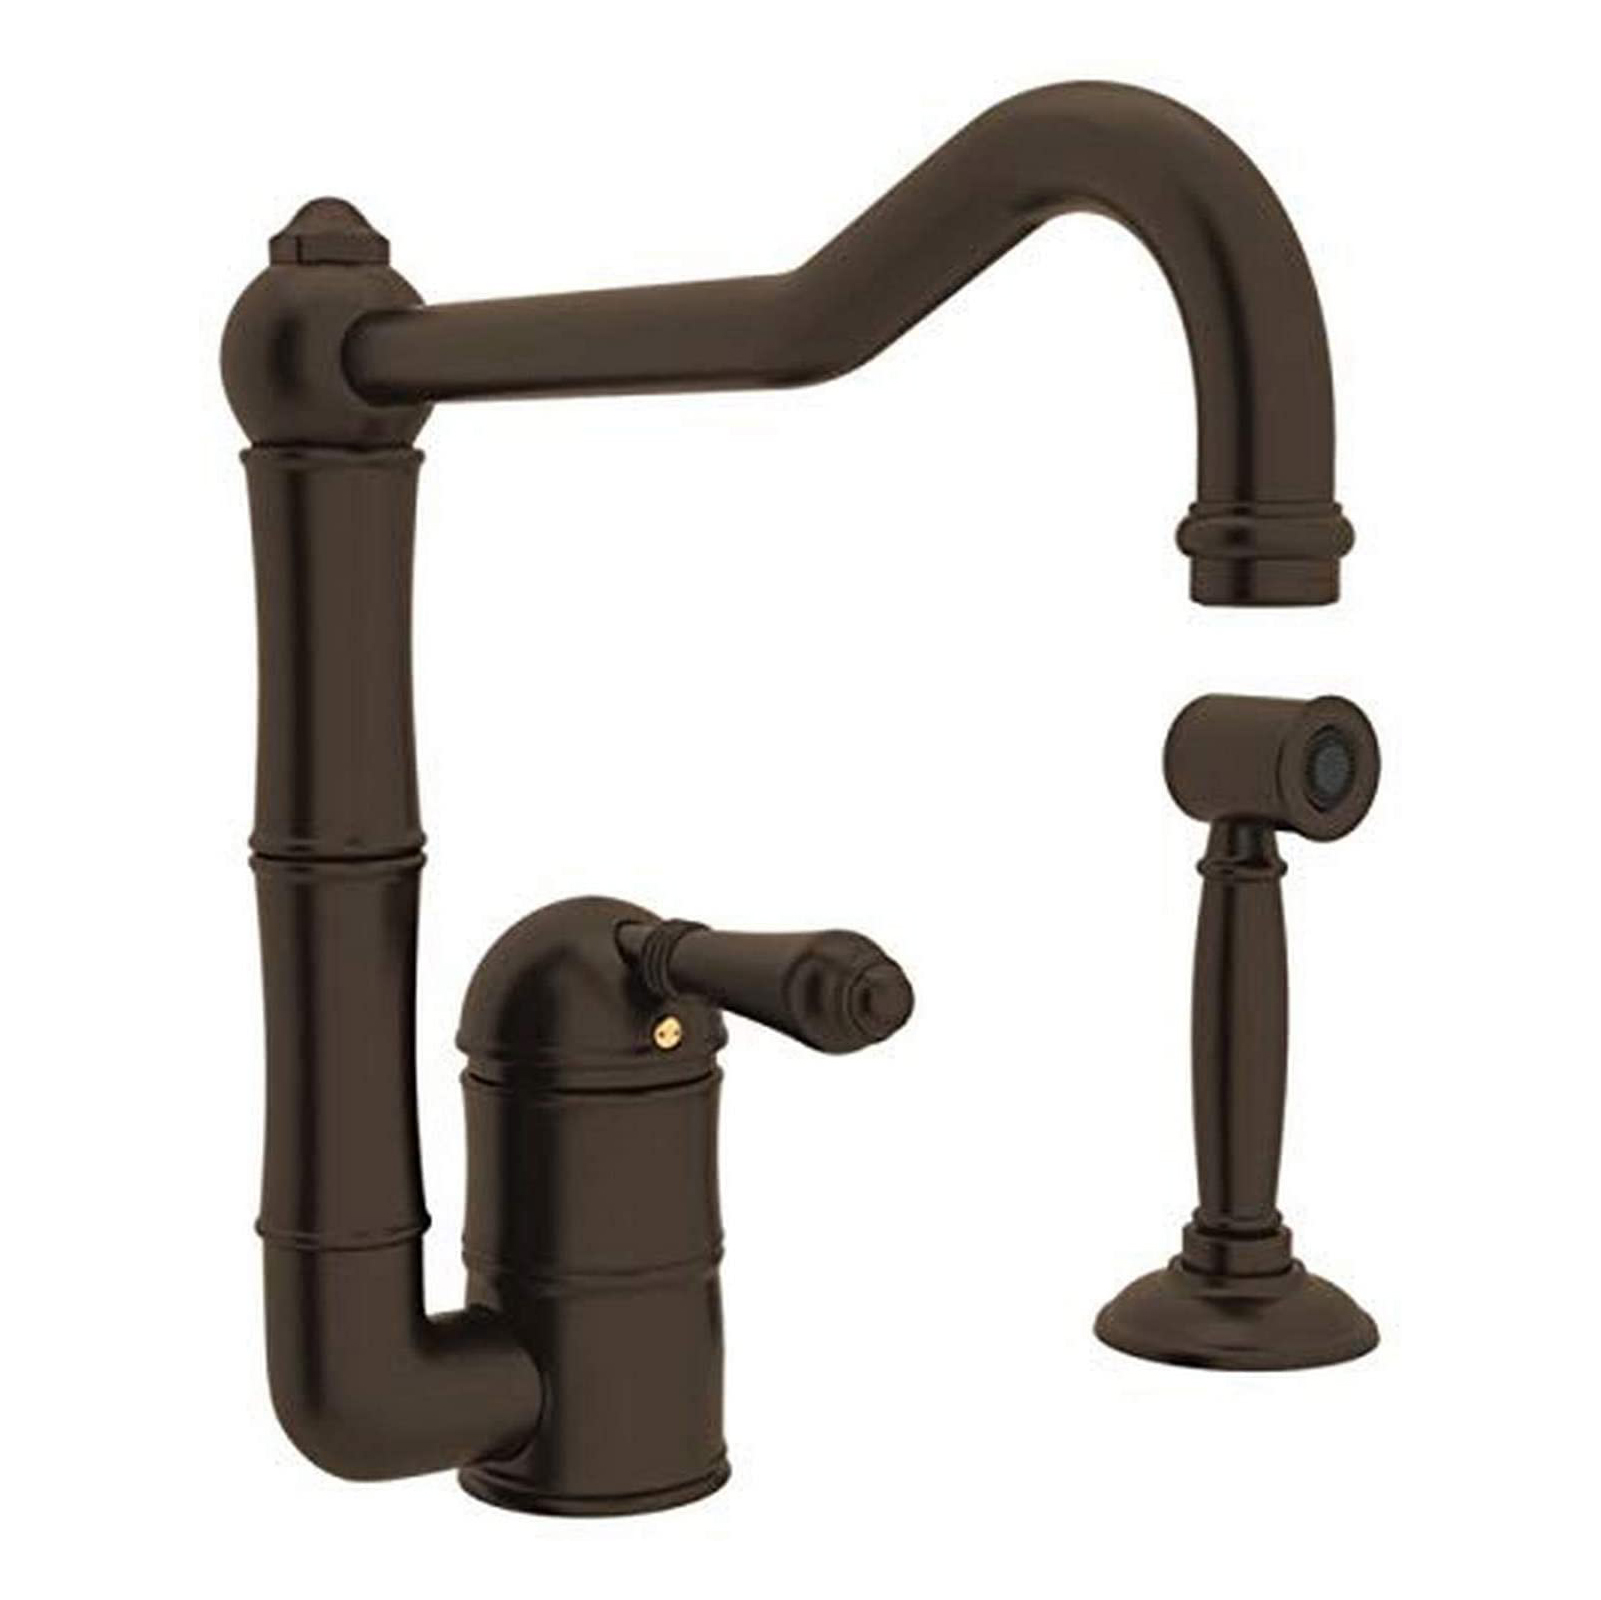 Italian Country Kitchen Faucet in Tuscan Bronze w/Metal Lever & Spray